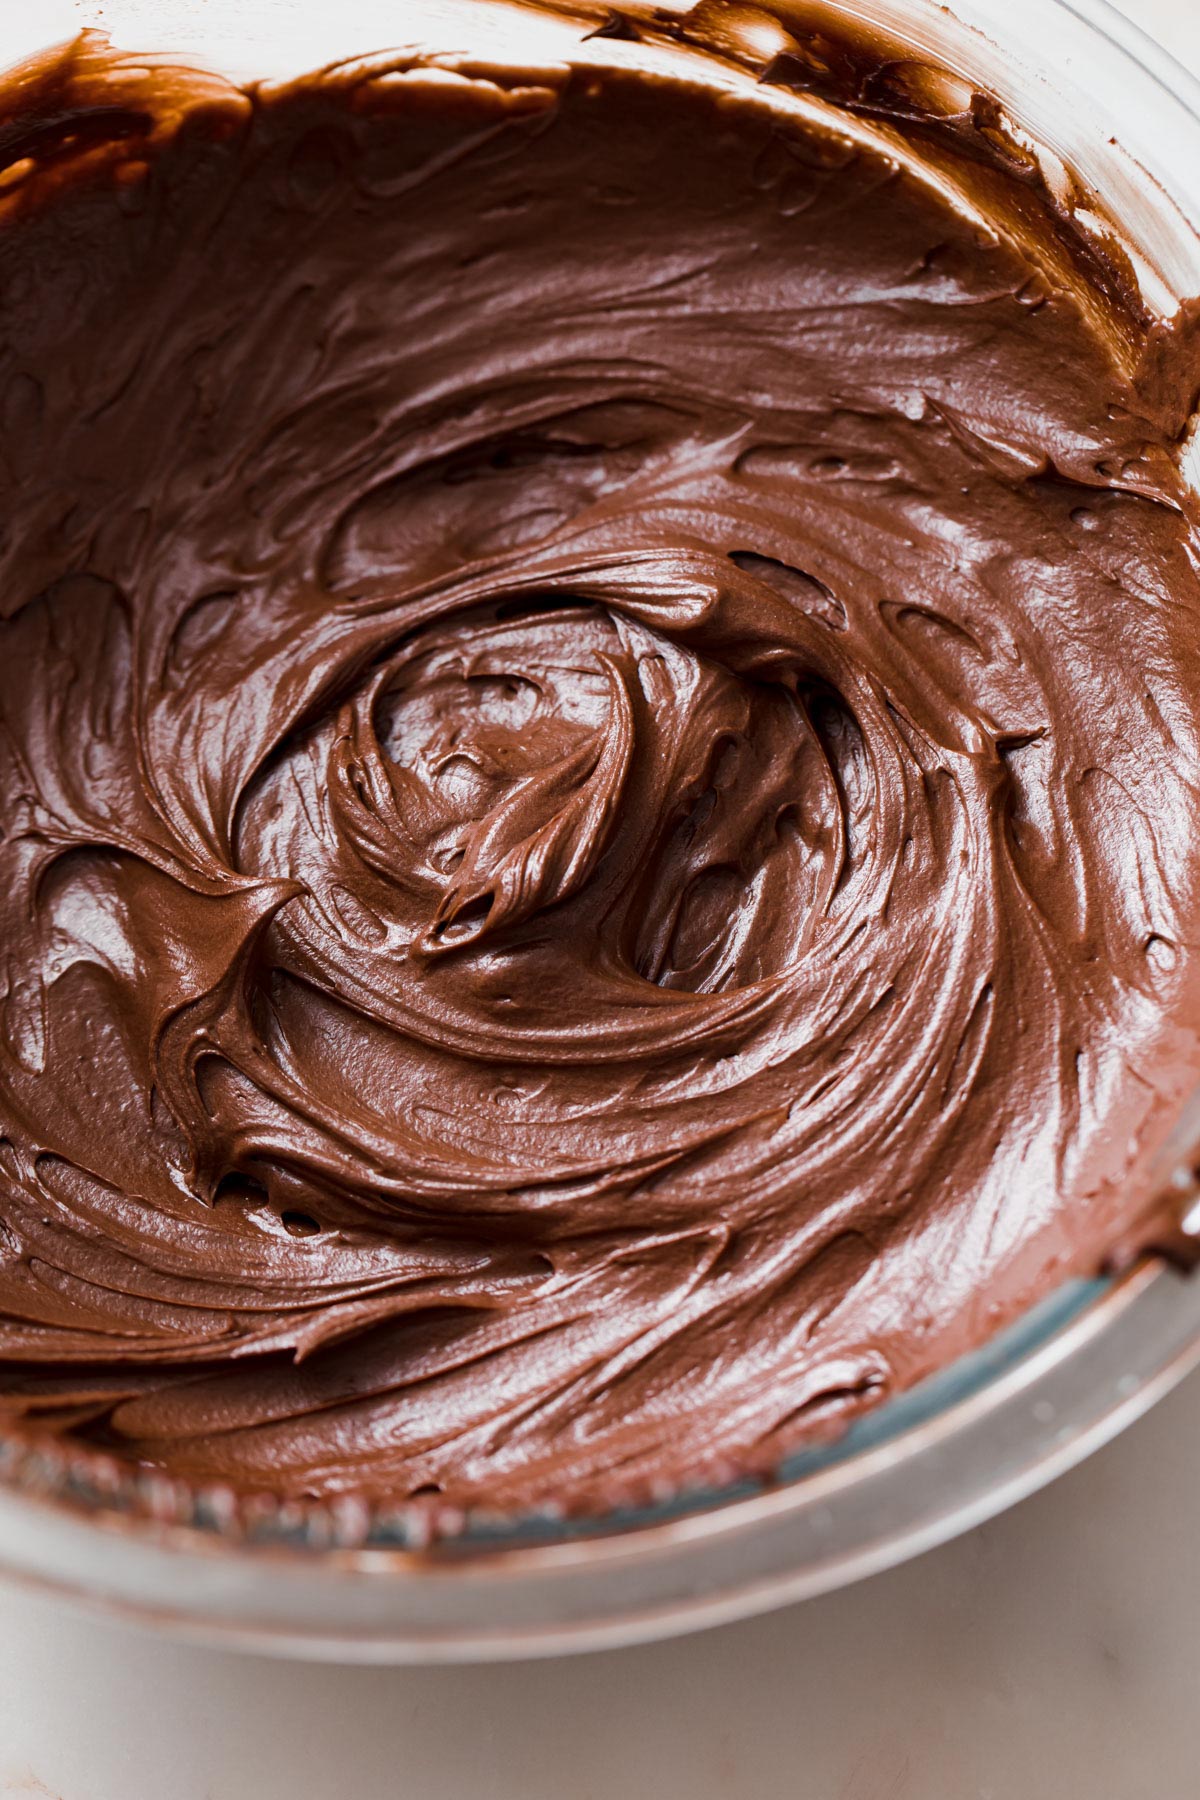 A bowl of freshly whipped ganache